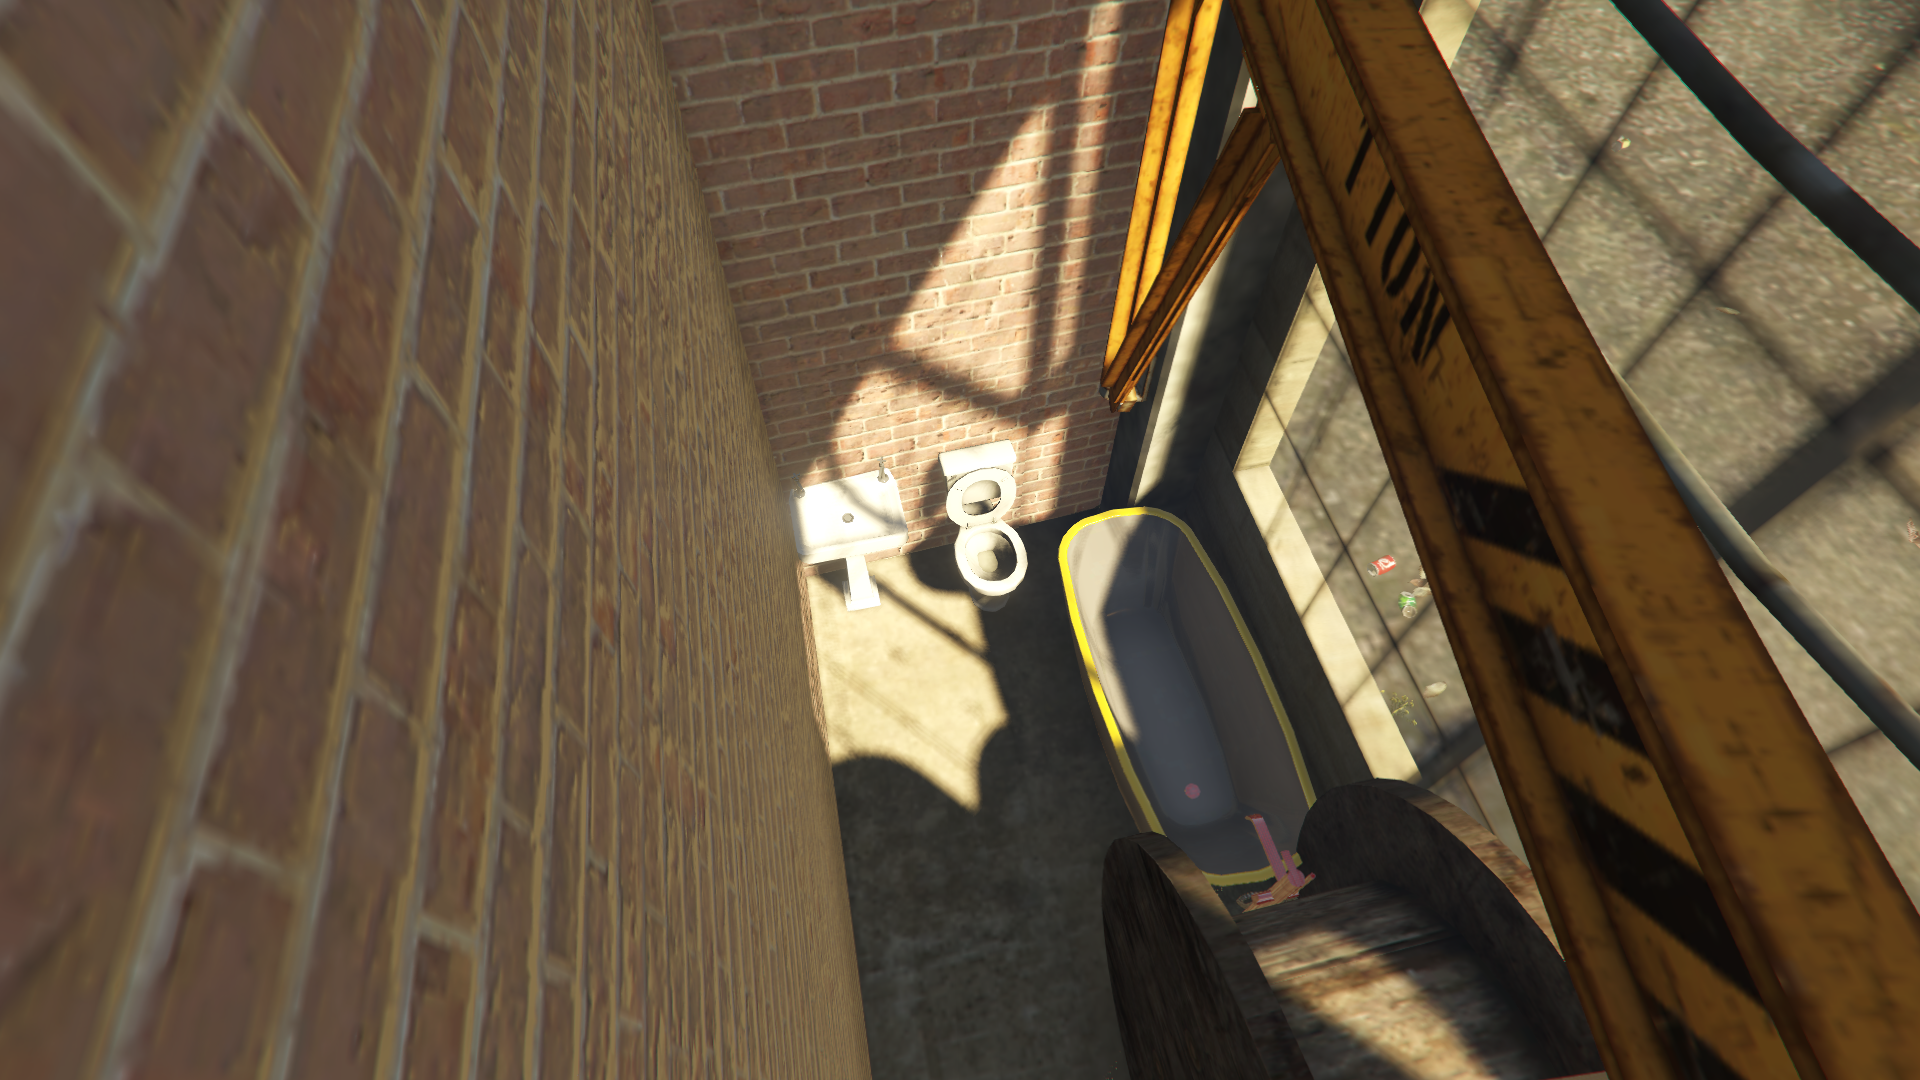 Grand_Theft_Auto_V_7_25_2022_5_05_25_PM.png